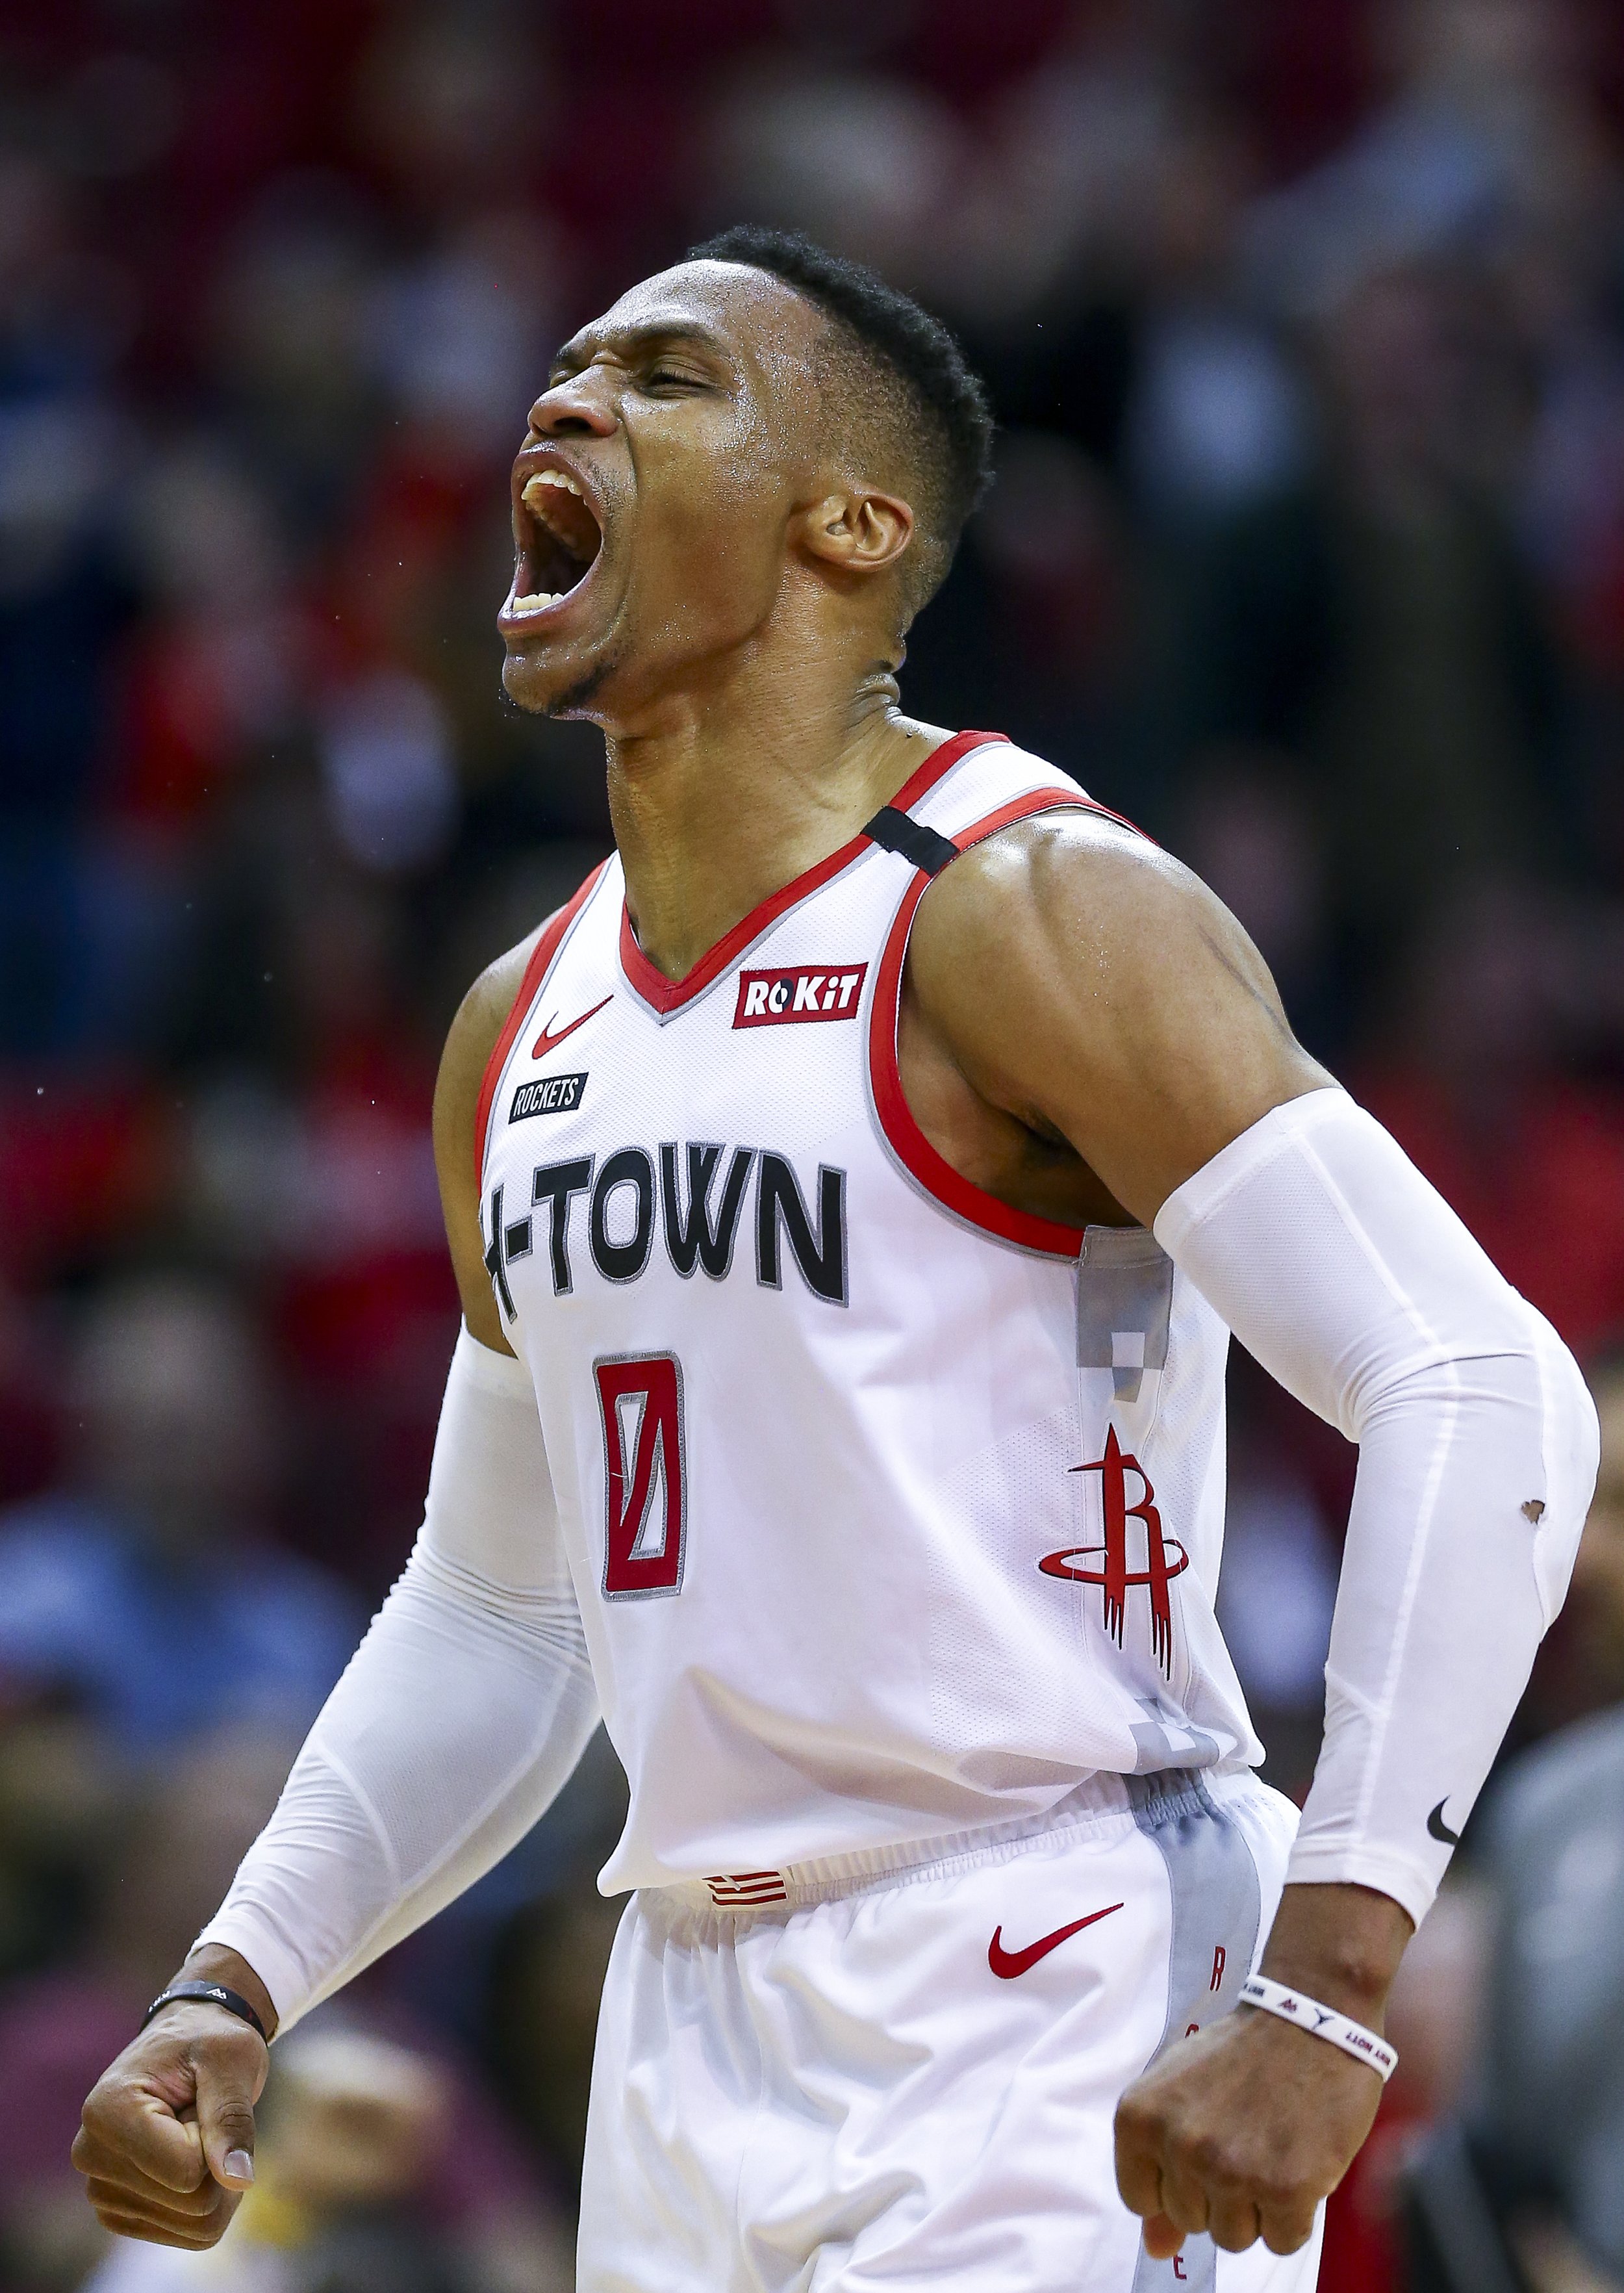  Houston Rockets guard Russell Westbrook (0) celebrates after stealing the ball and earning an assist against the Minnesota Timberwolves during the second half of an NBA game at the Toyota Center Saturday, Jan. 11, 2020, in Houston. The Rockets won 1